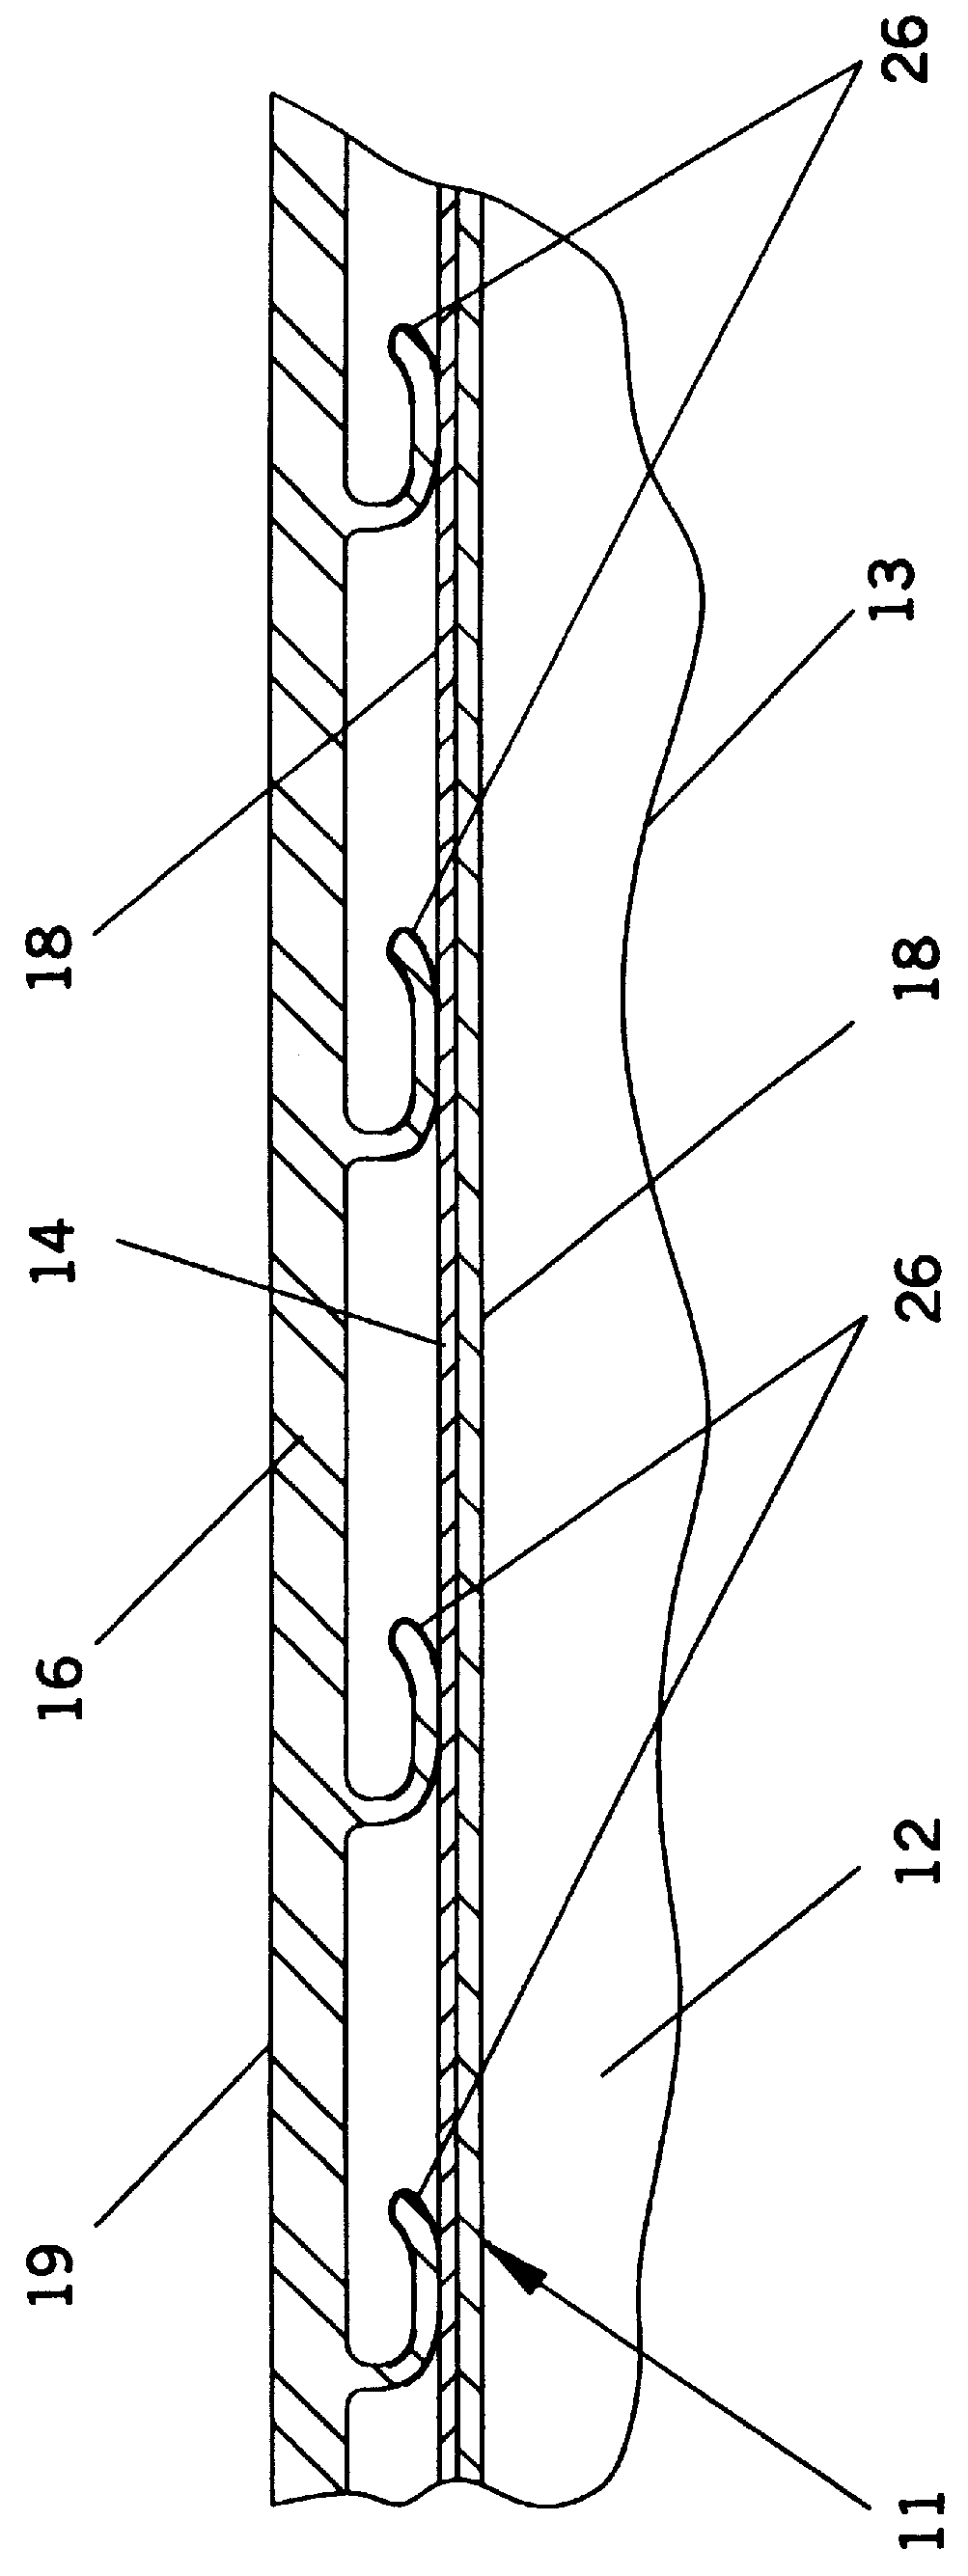 Electronic chassis electro-magnetic interference seal and sealing device